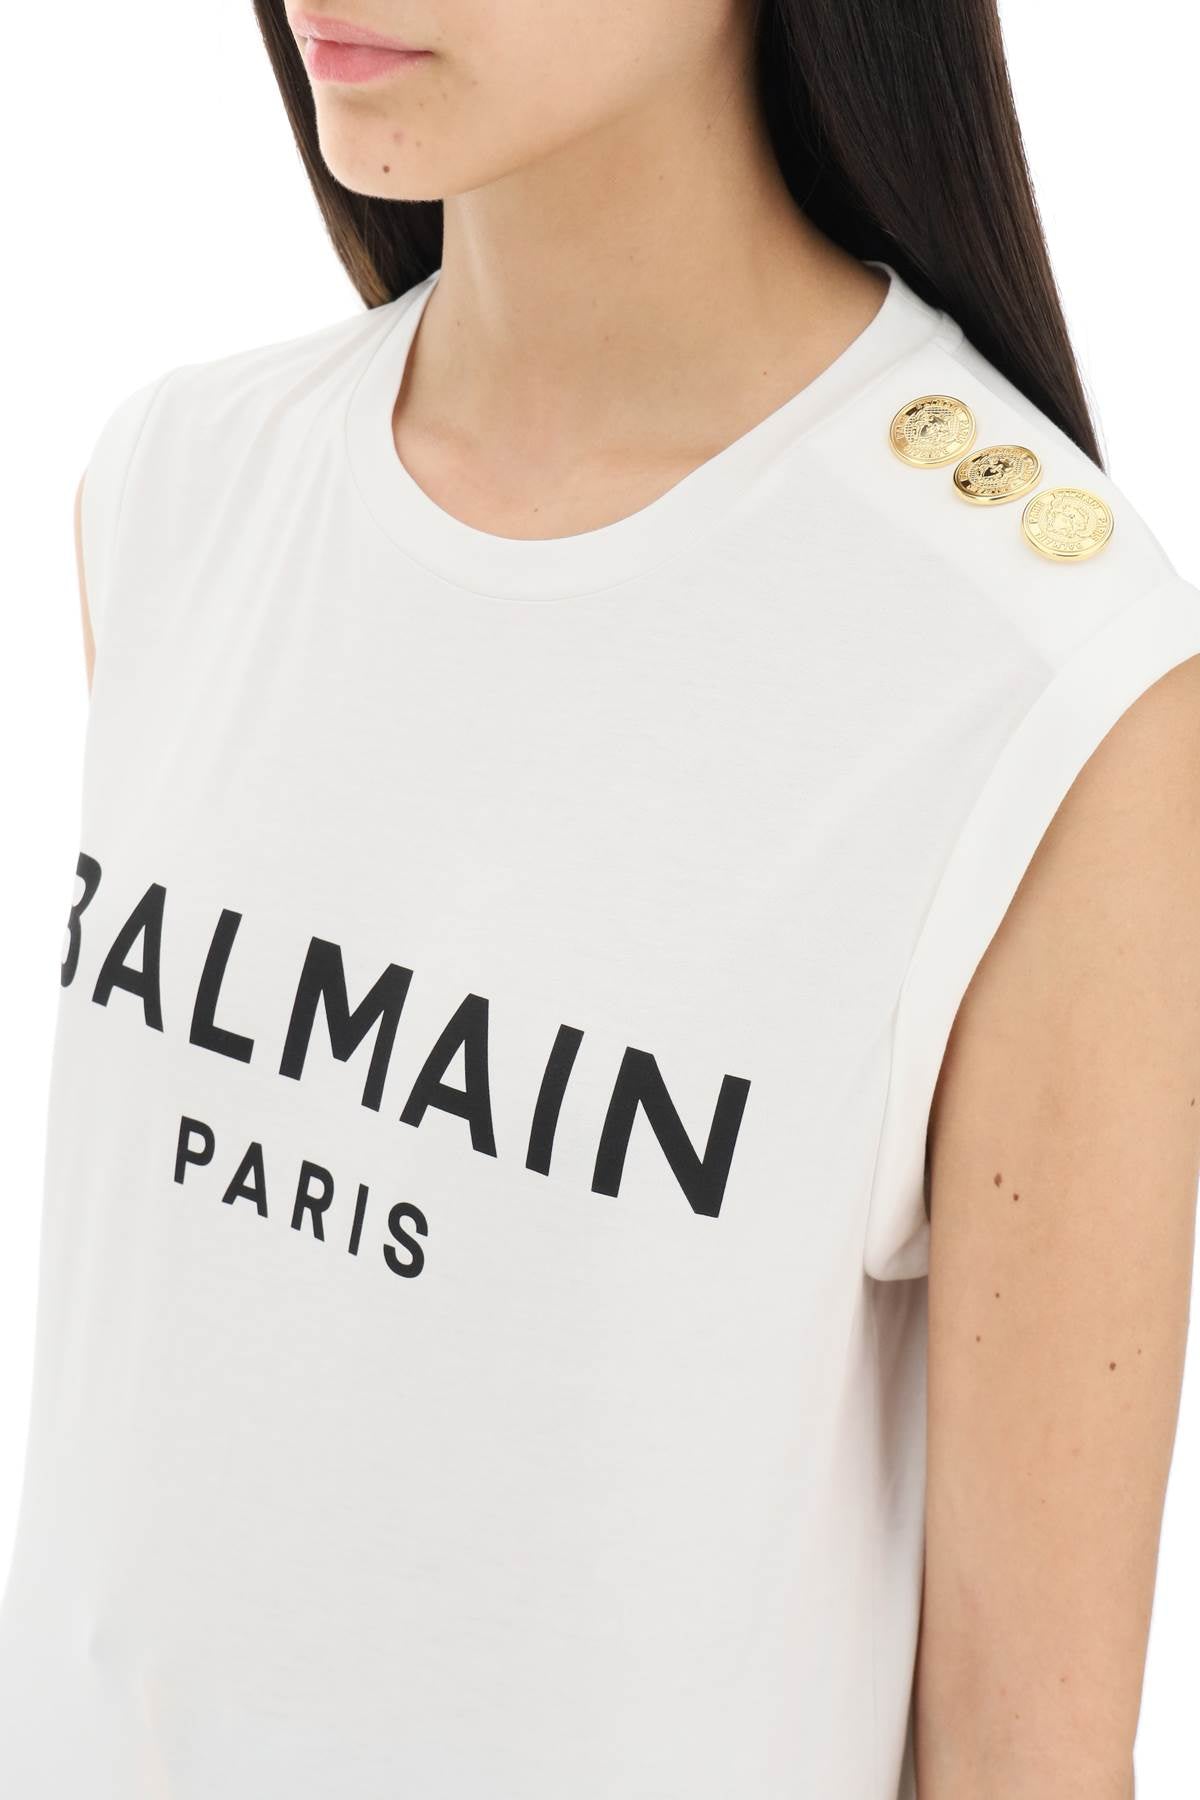 Balmain Logo Top With Embossed Buttons White